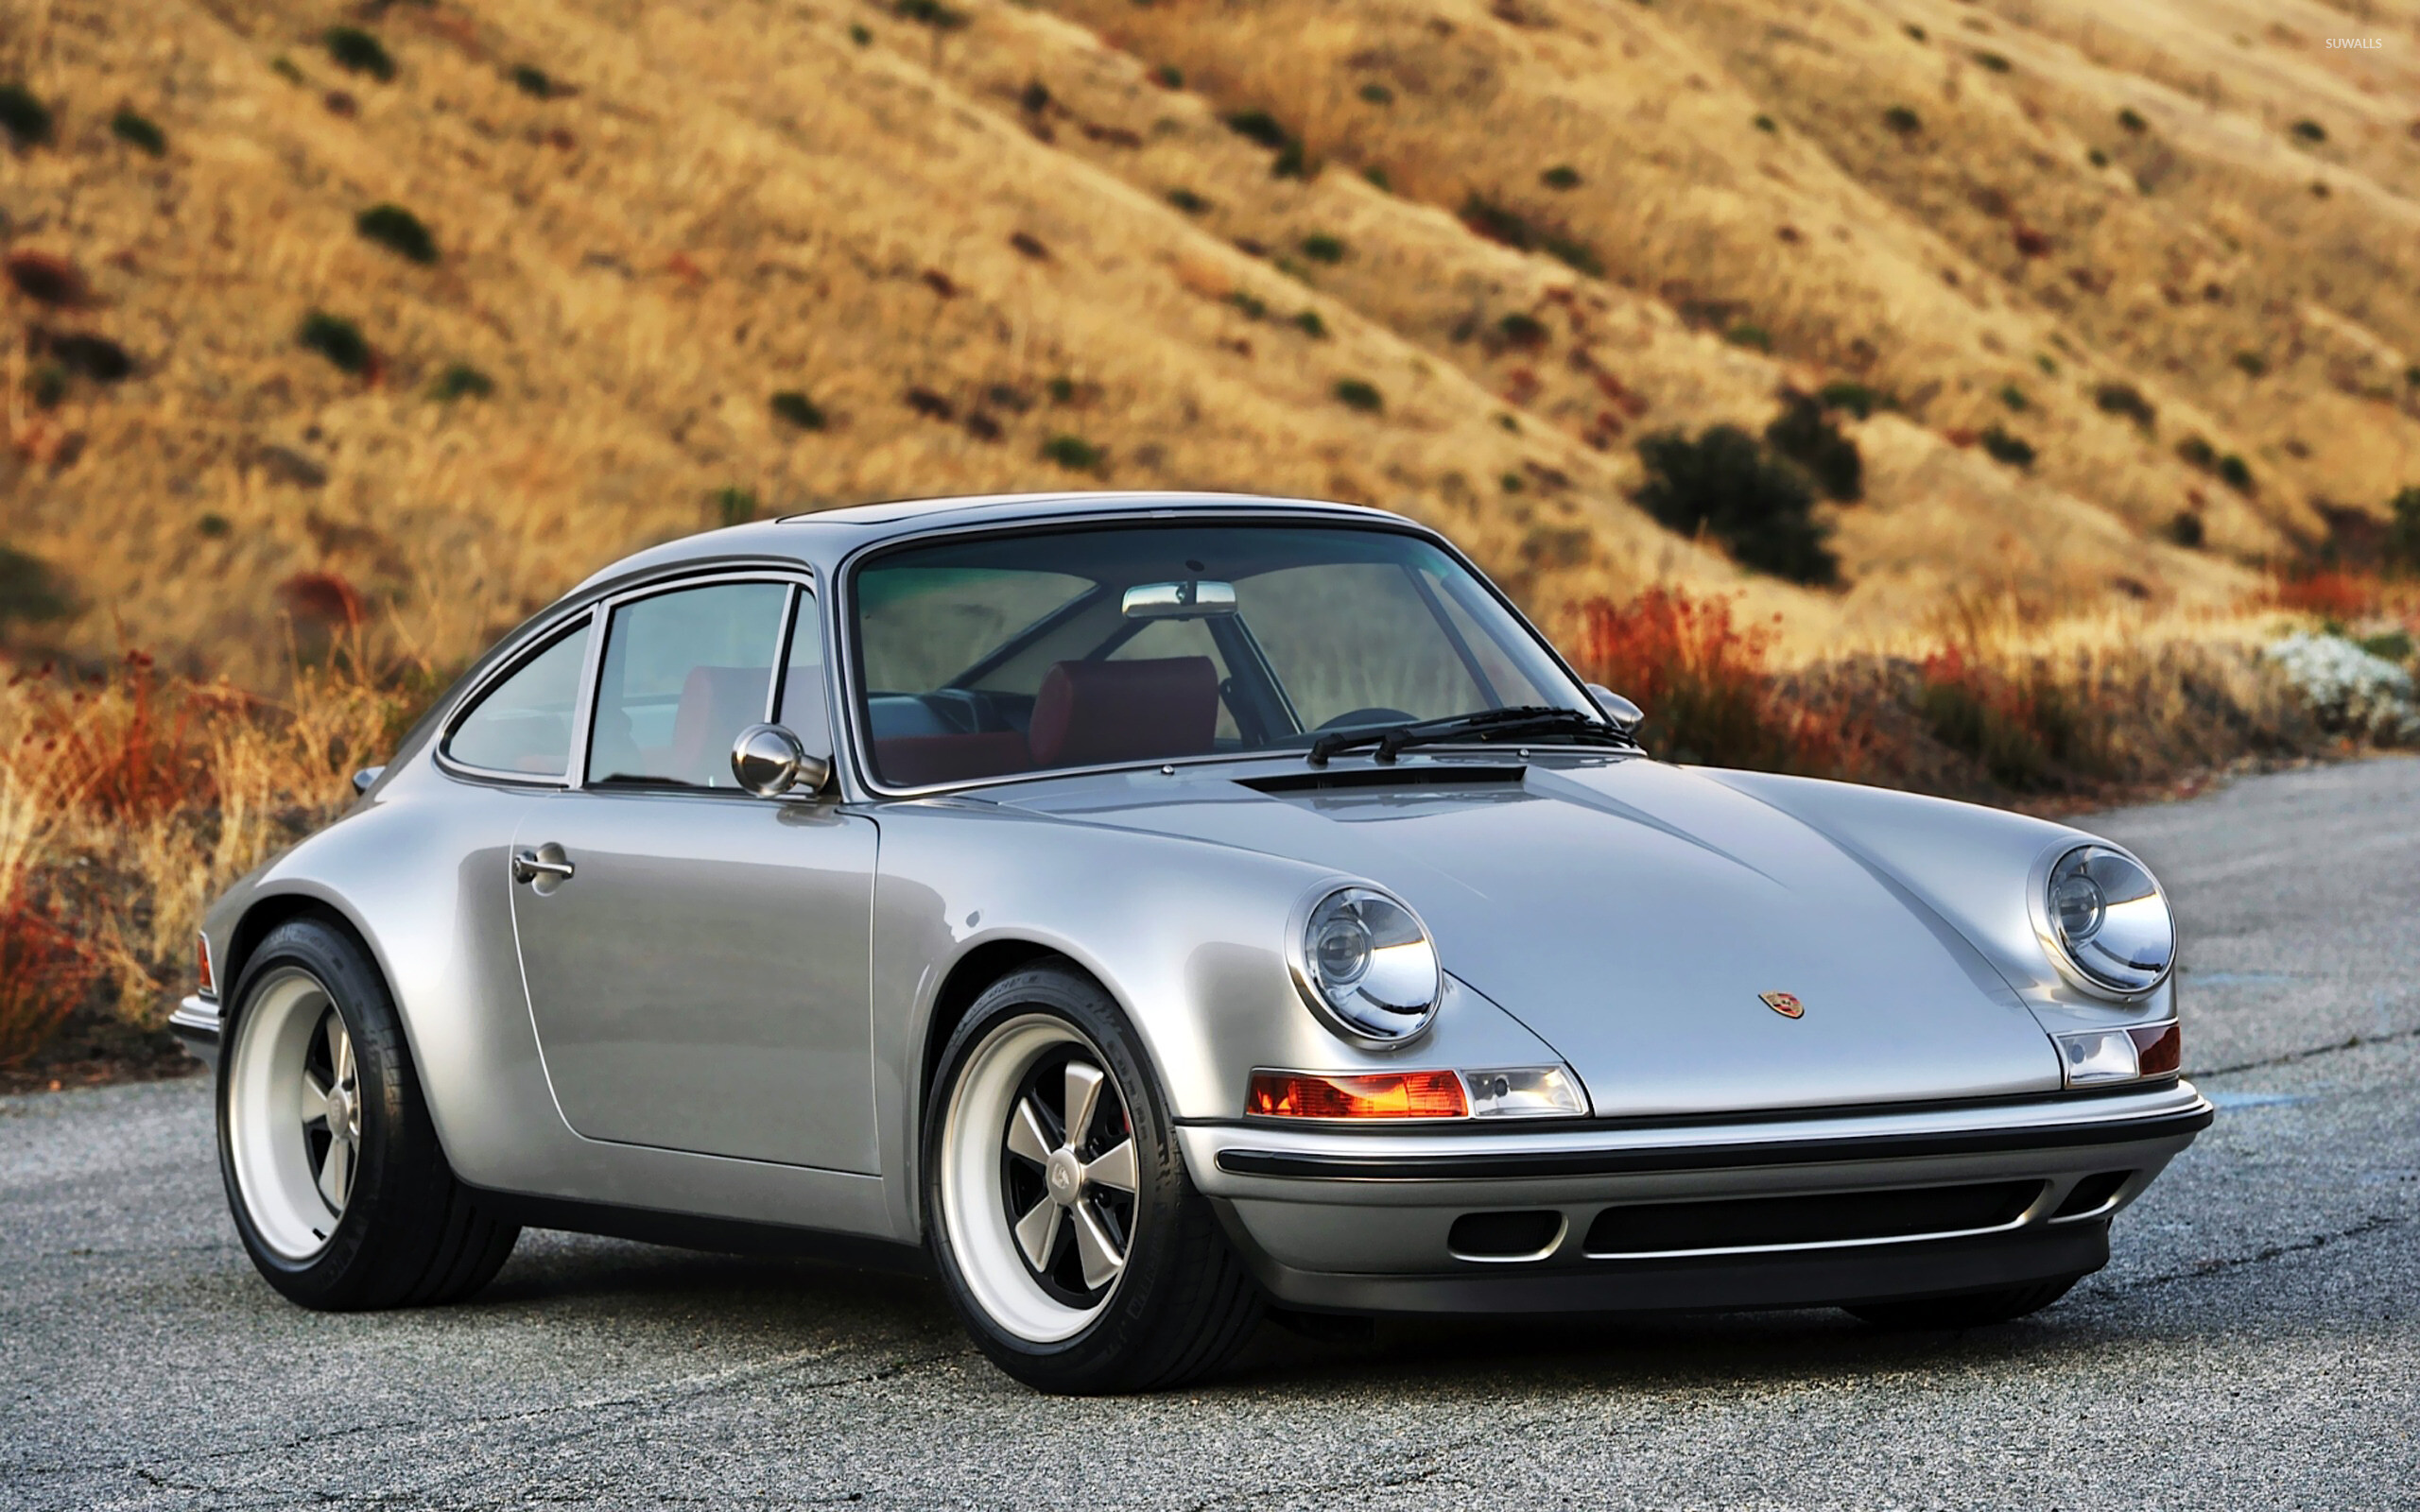 Porsche 911: The 1976 Carrera 2.7 MFI Sondermodells were the last mechanically fuel injected models produced. 2560x1600 HD Background.